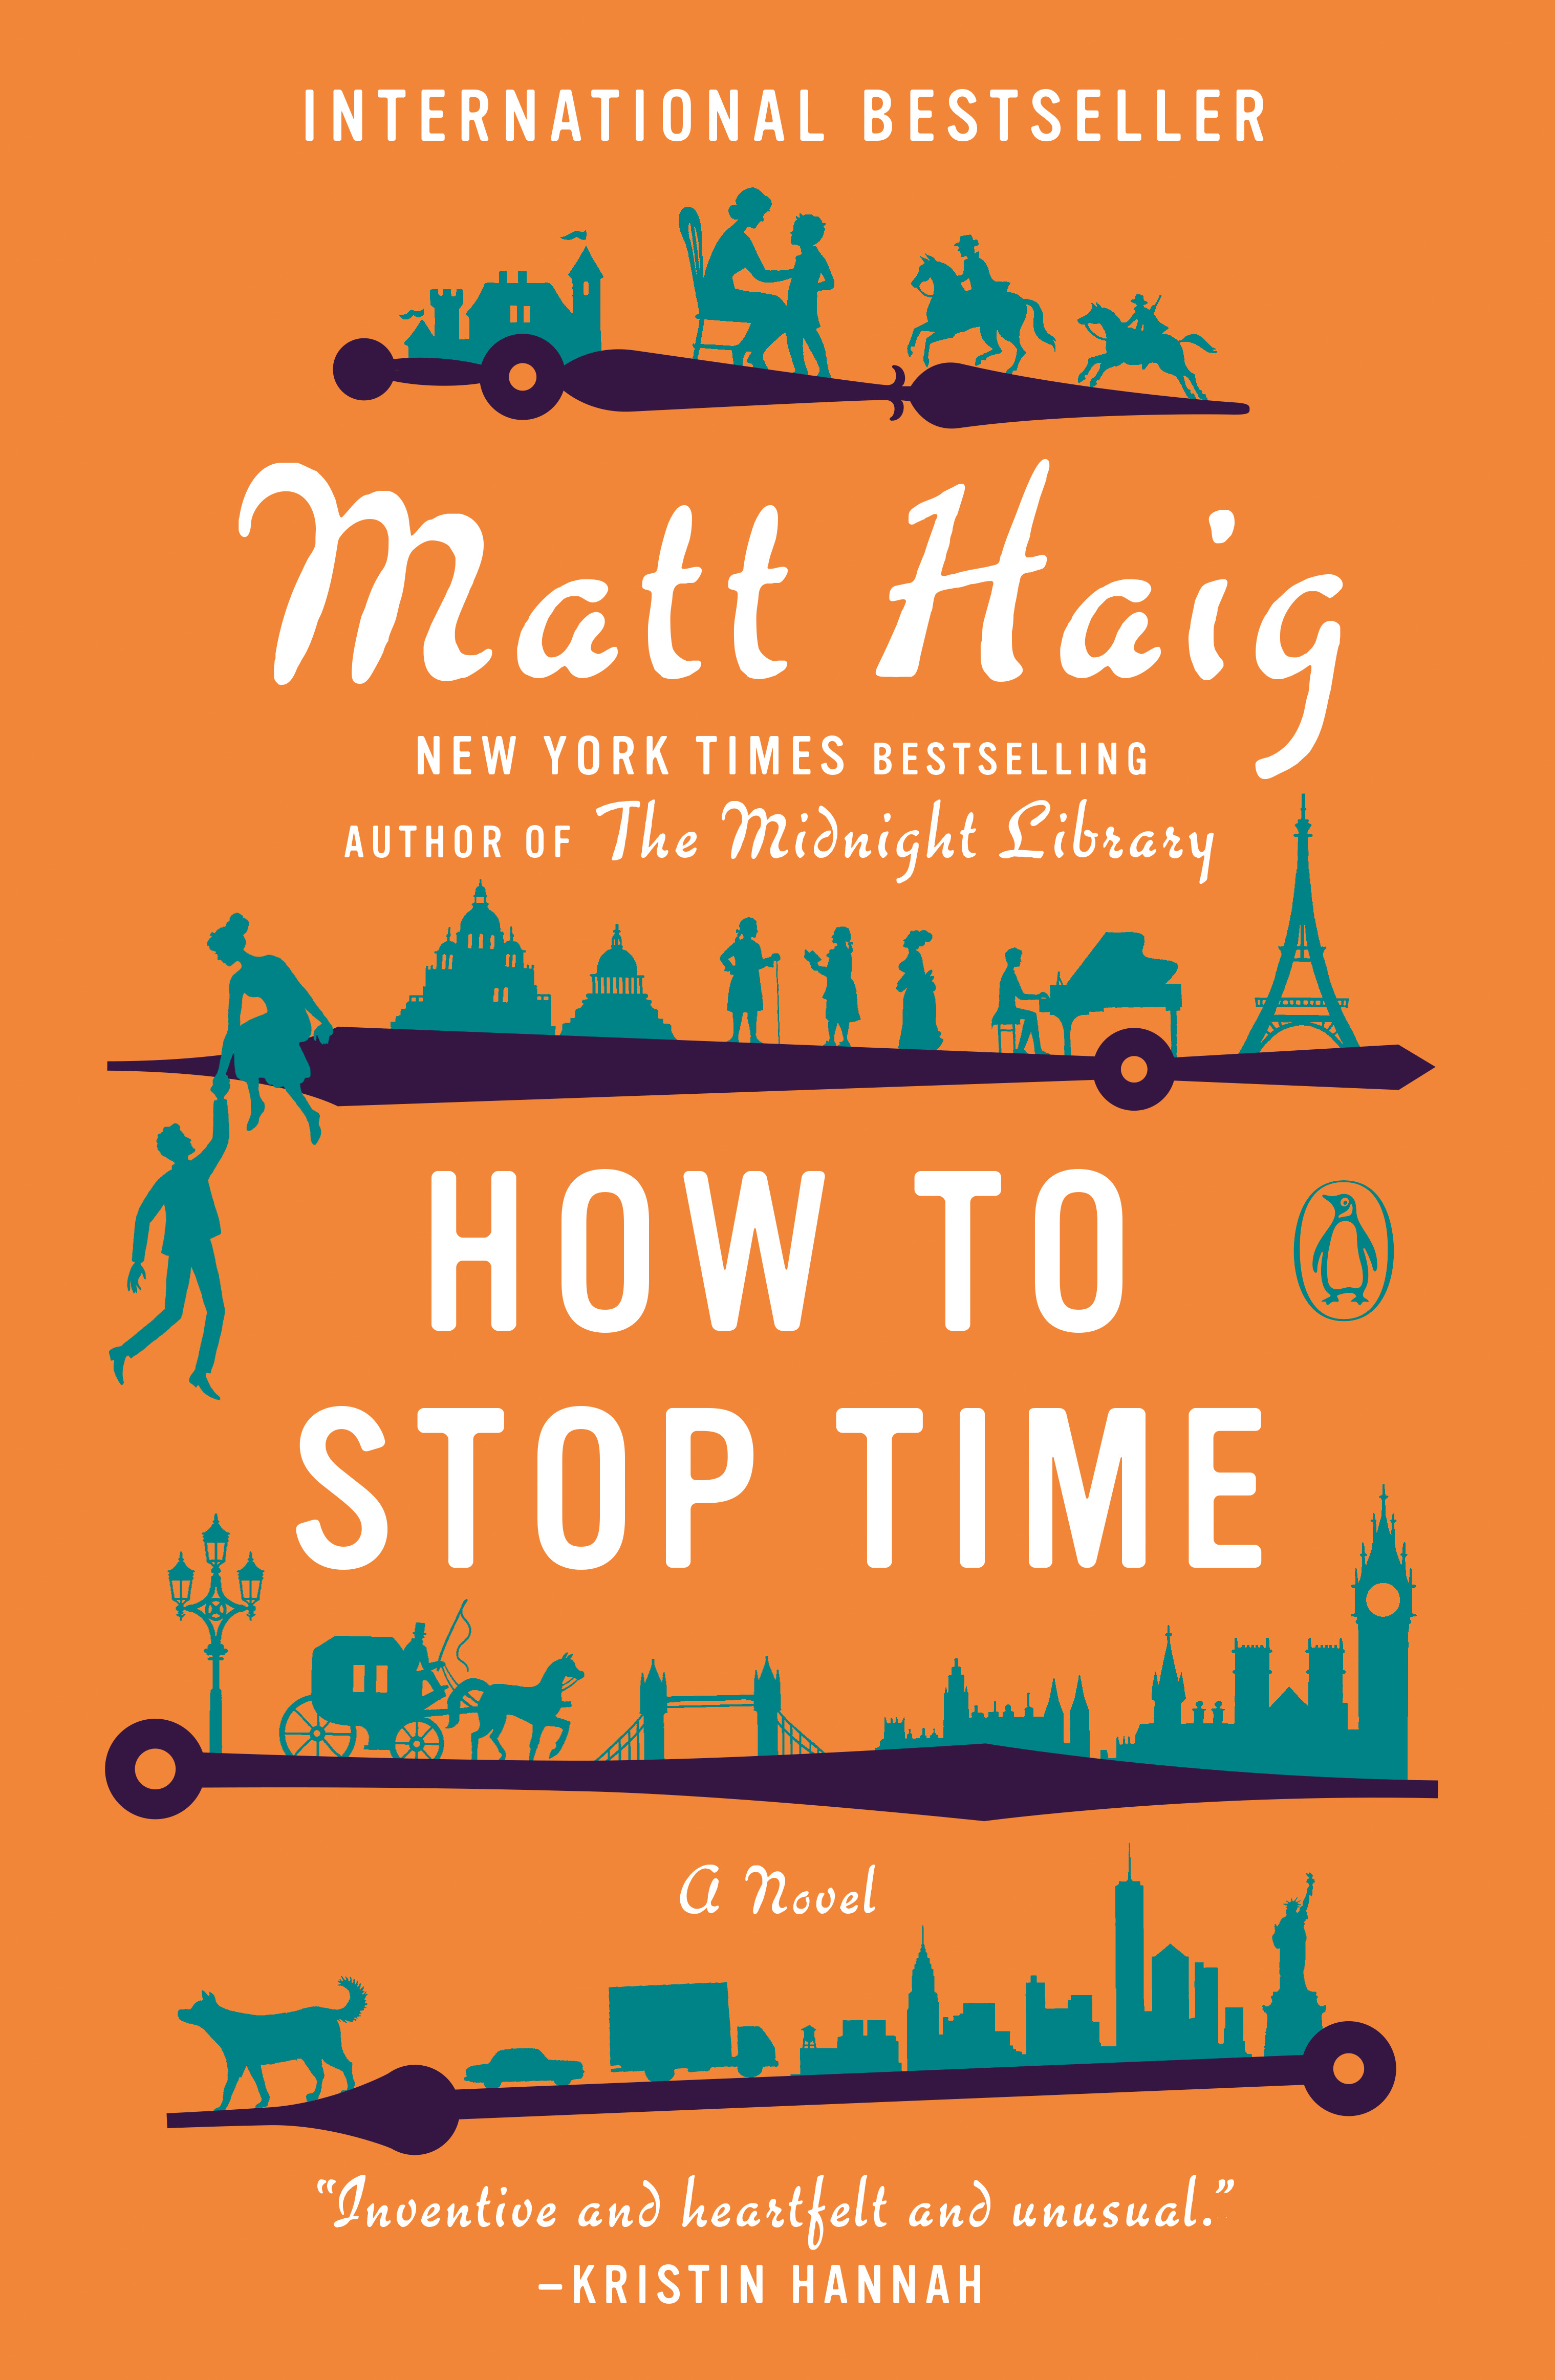 How to Stop Time by Matt Haig PDF Download